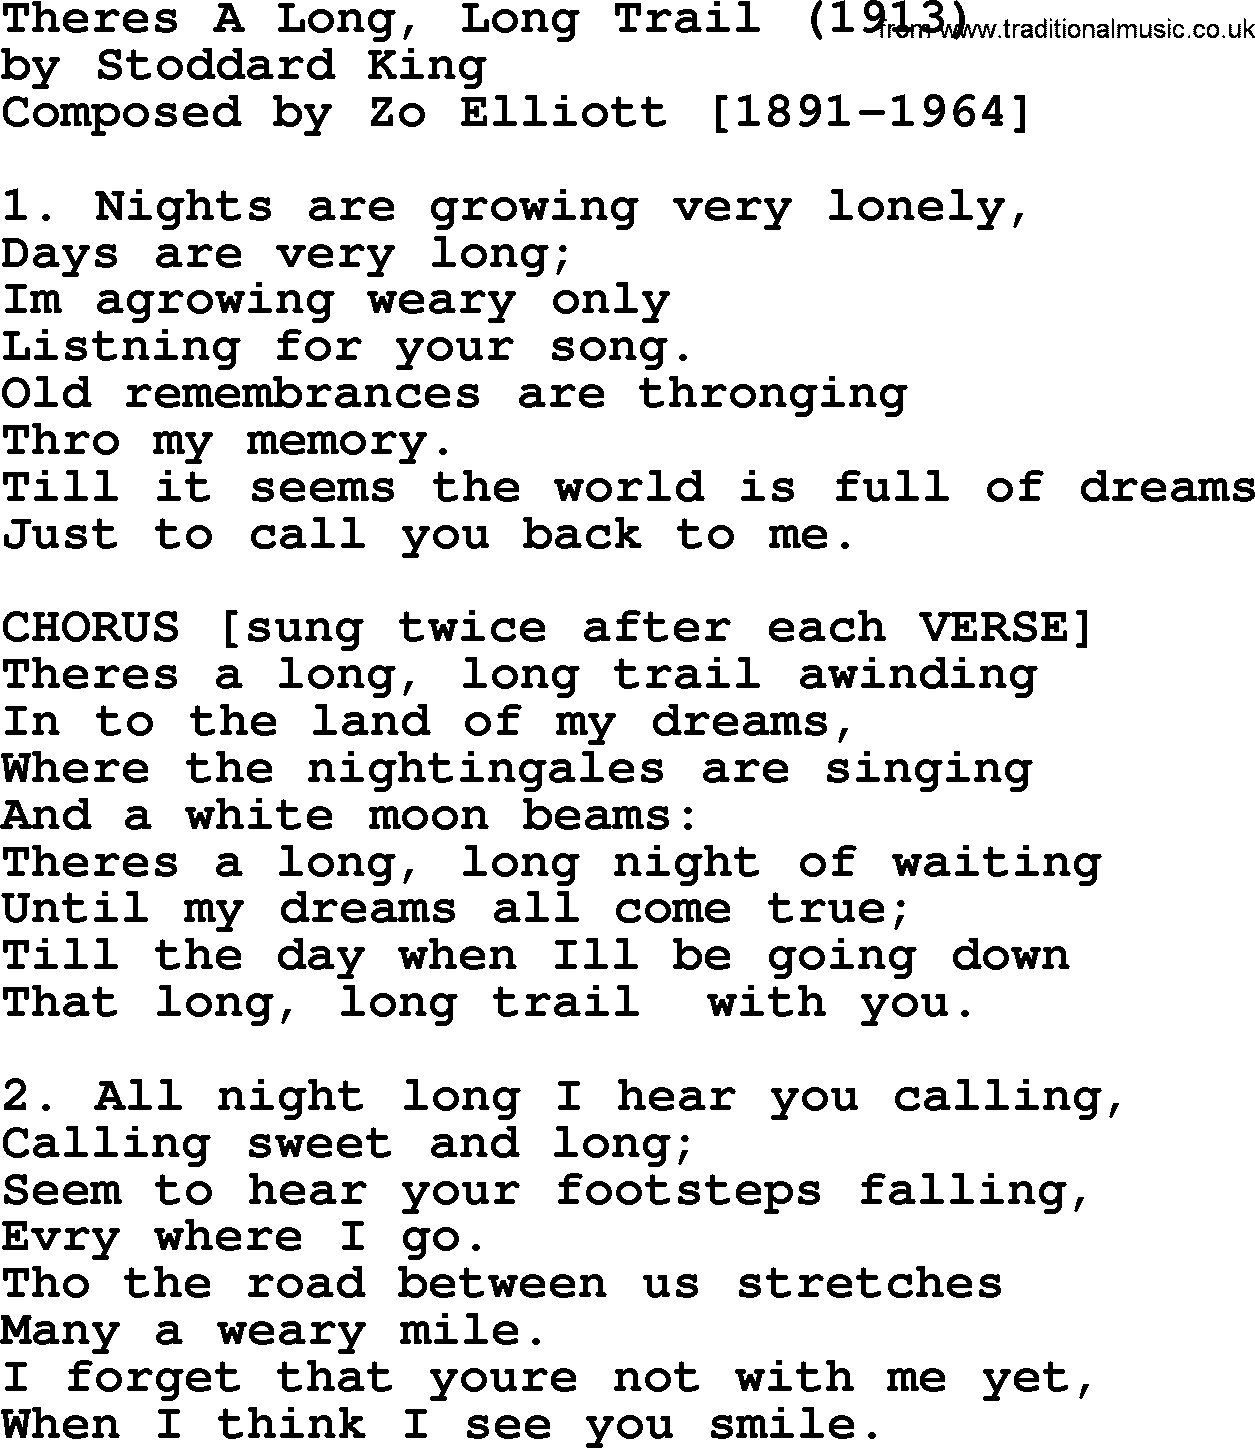 World War(WW1) One Song: There's A Long, Long Trail 1913, lyrics and PDF